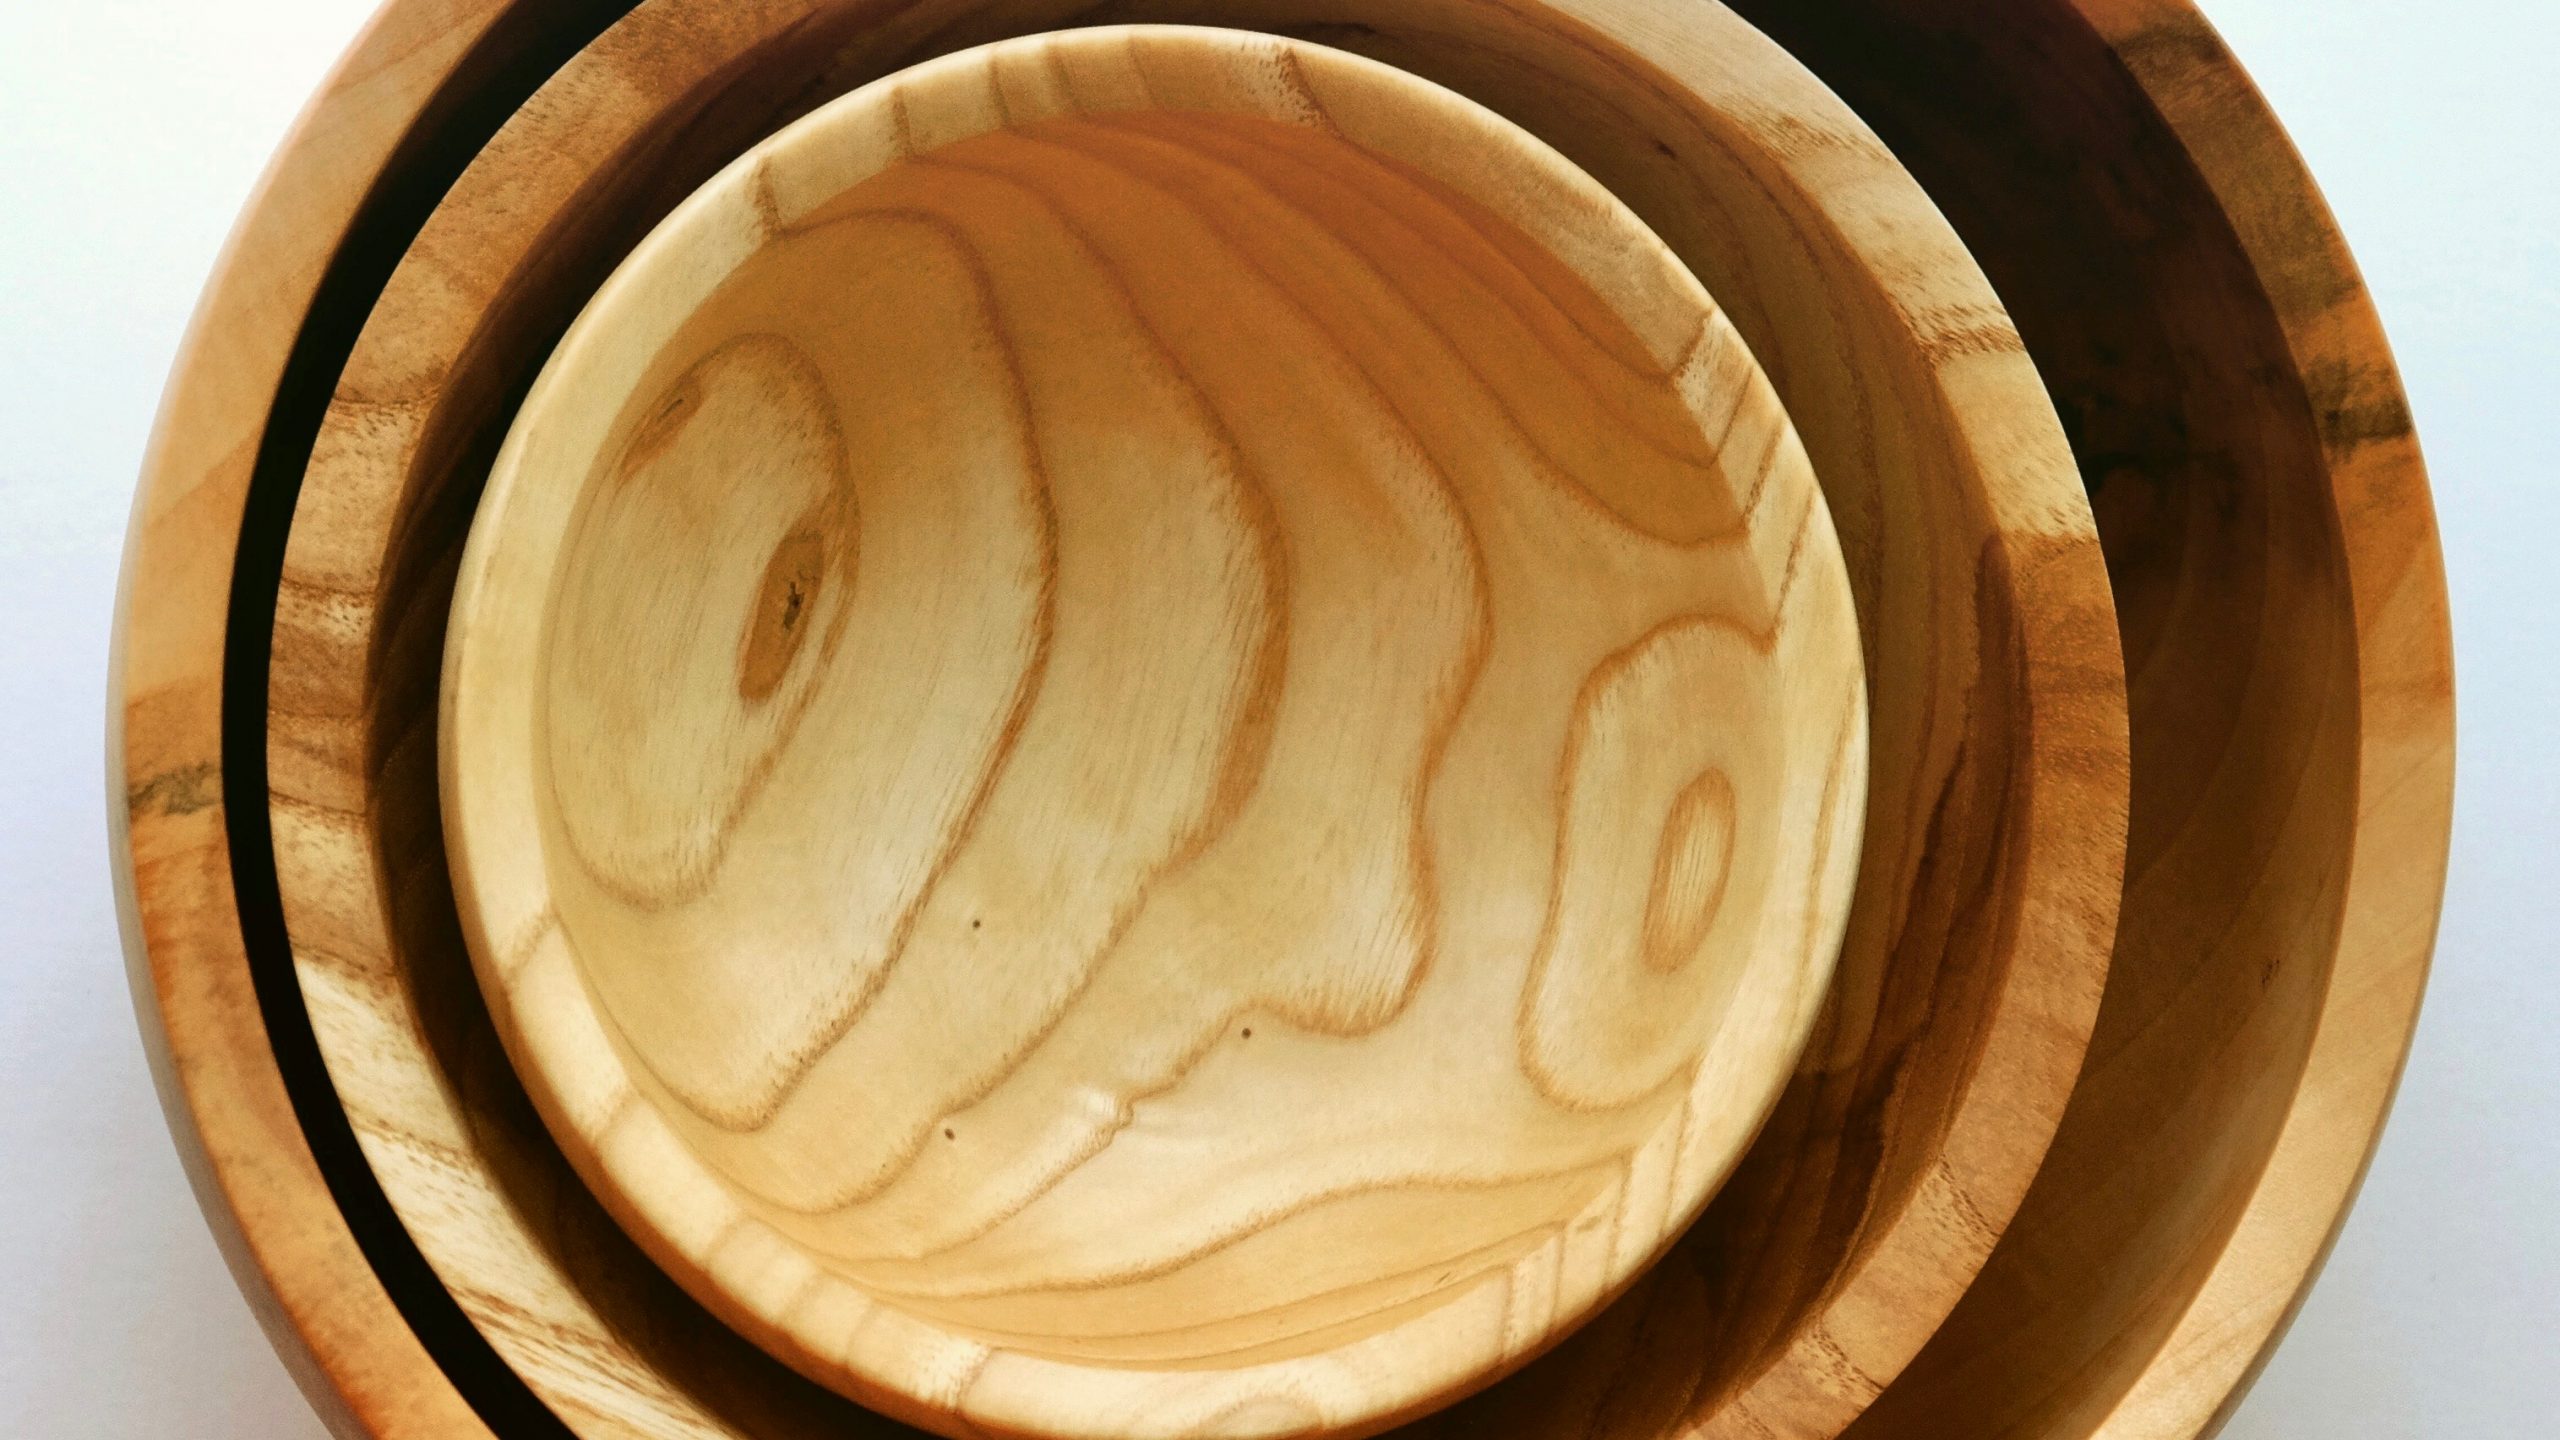 Nested bowls